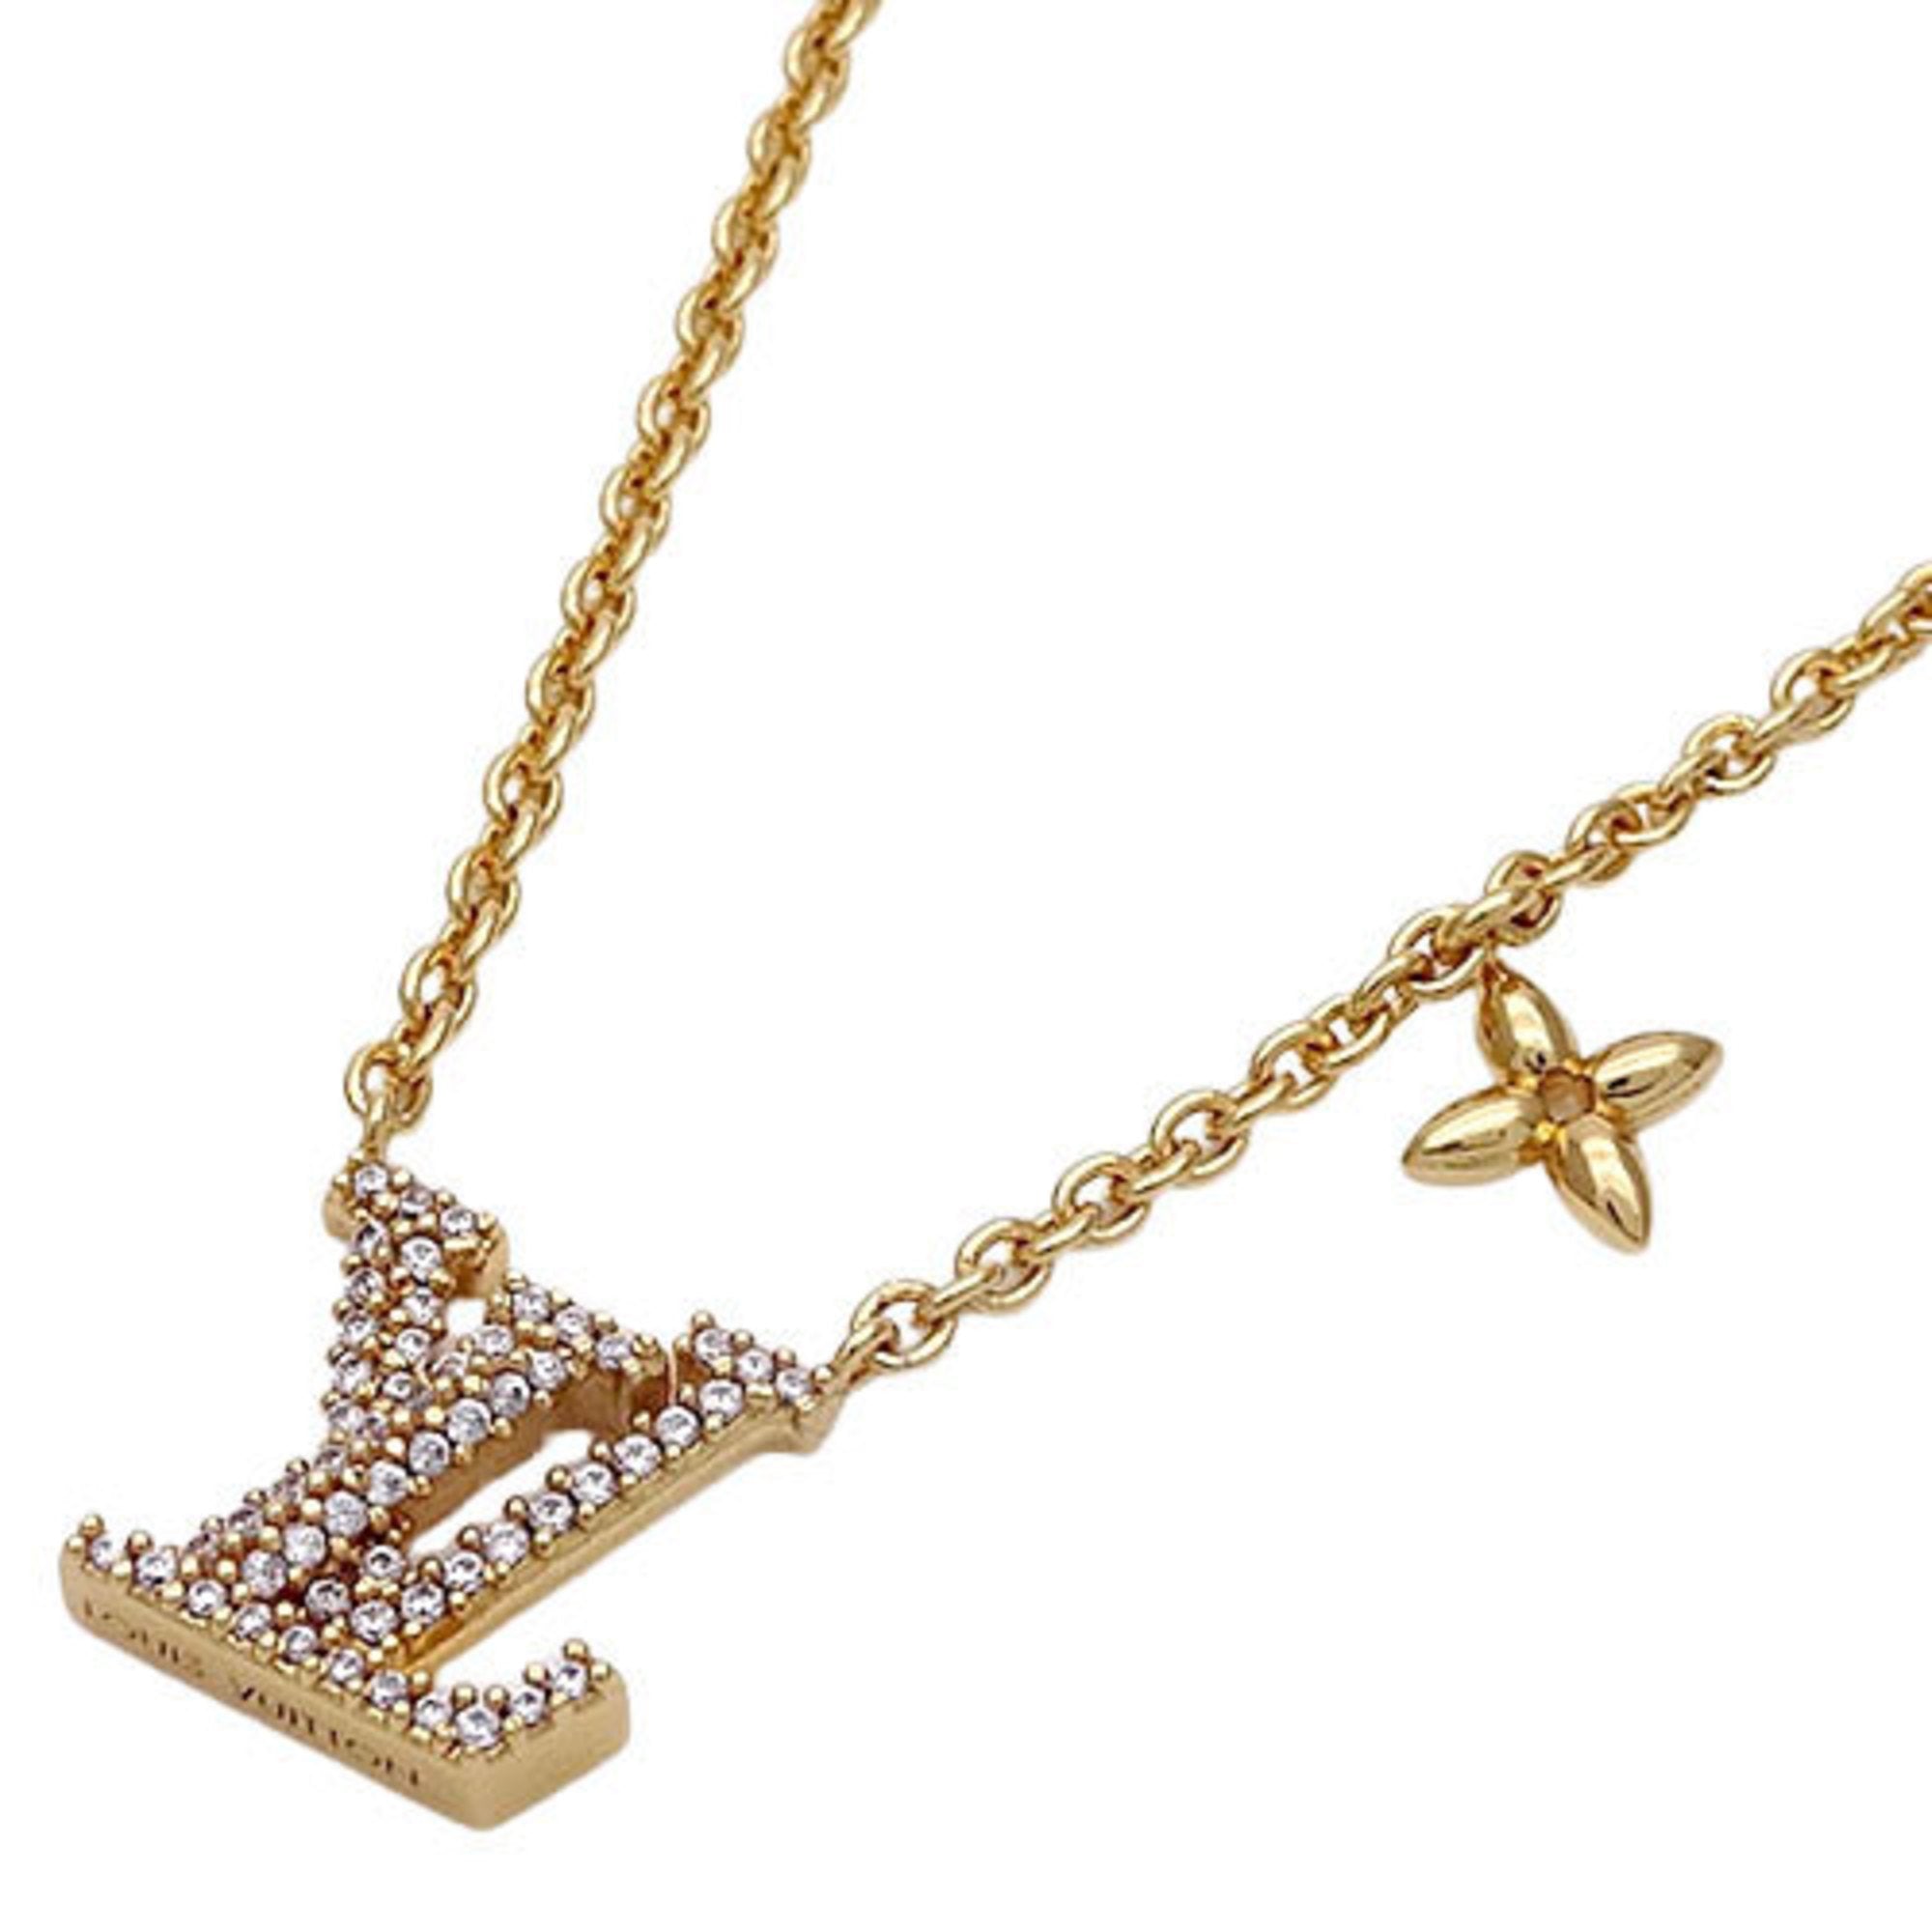 Louis Vuitton Gold Tone Metal And Rhinestone Necklace